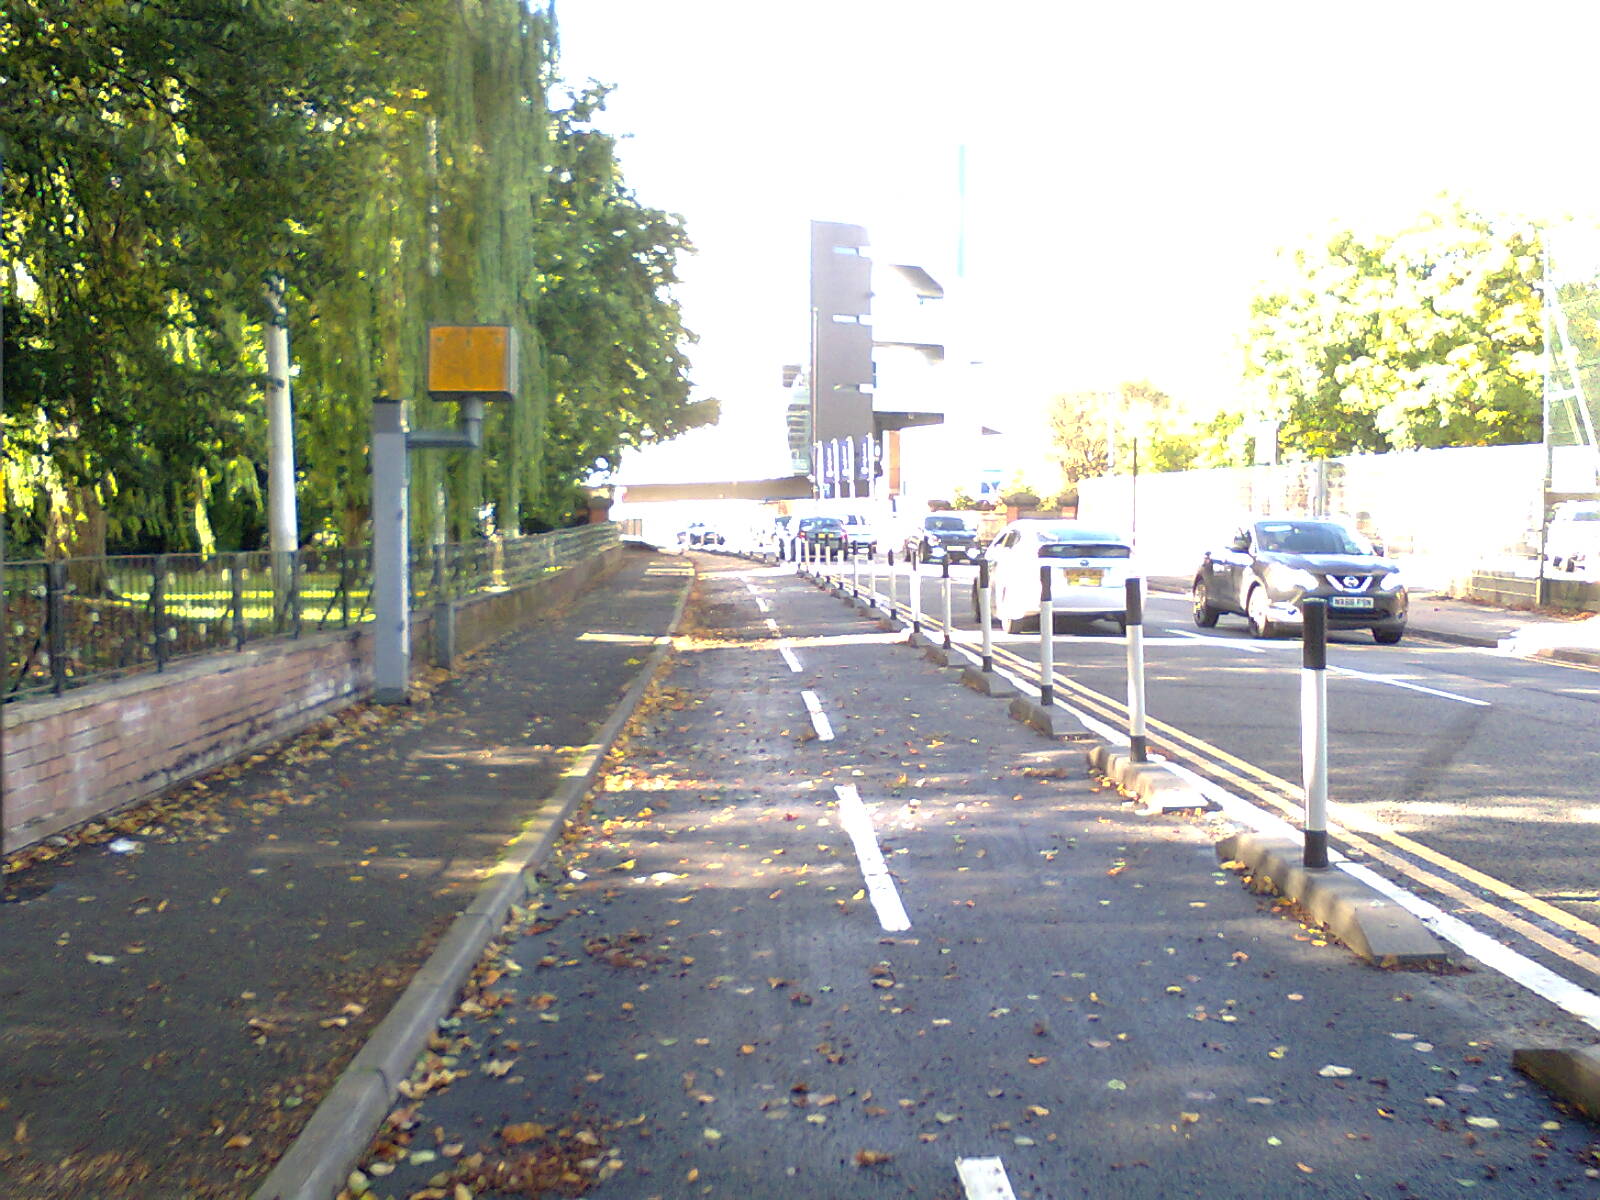 Cycle track on Edgbaston Road facing the cricket ground.